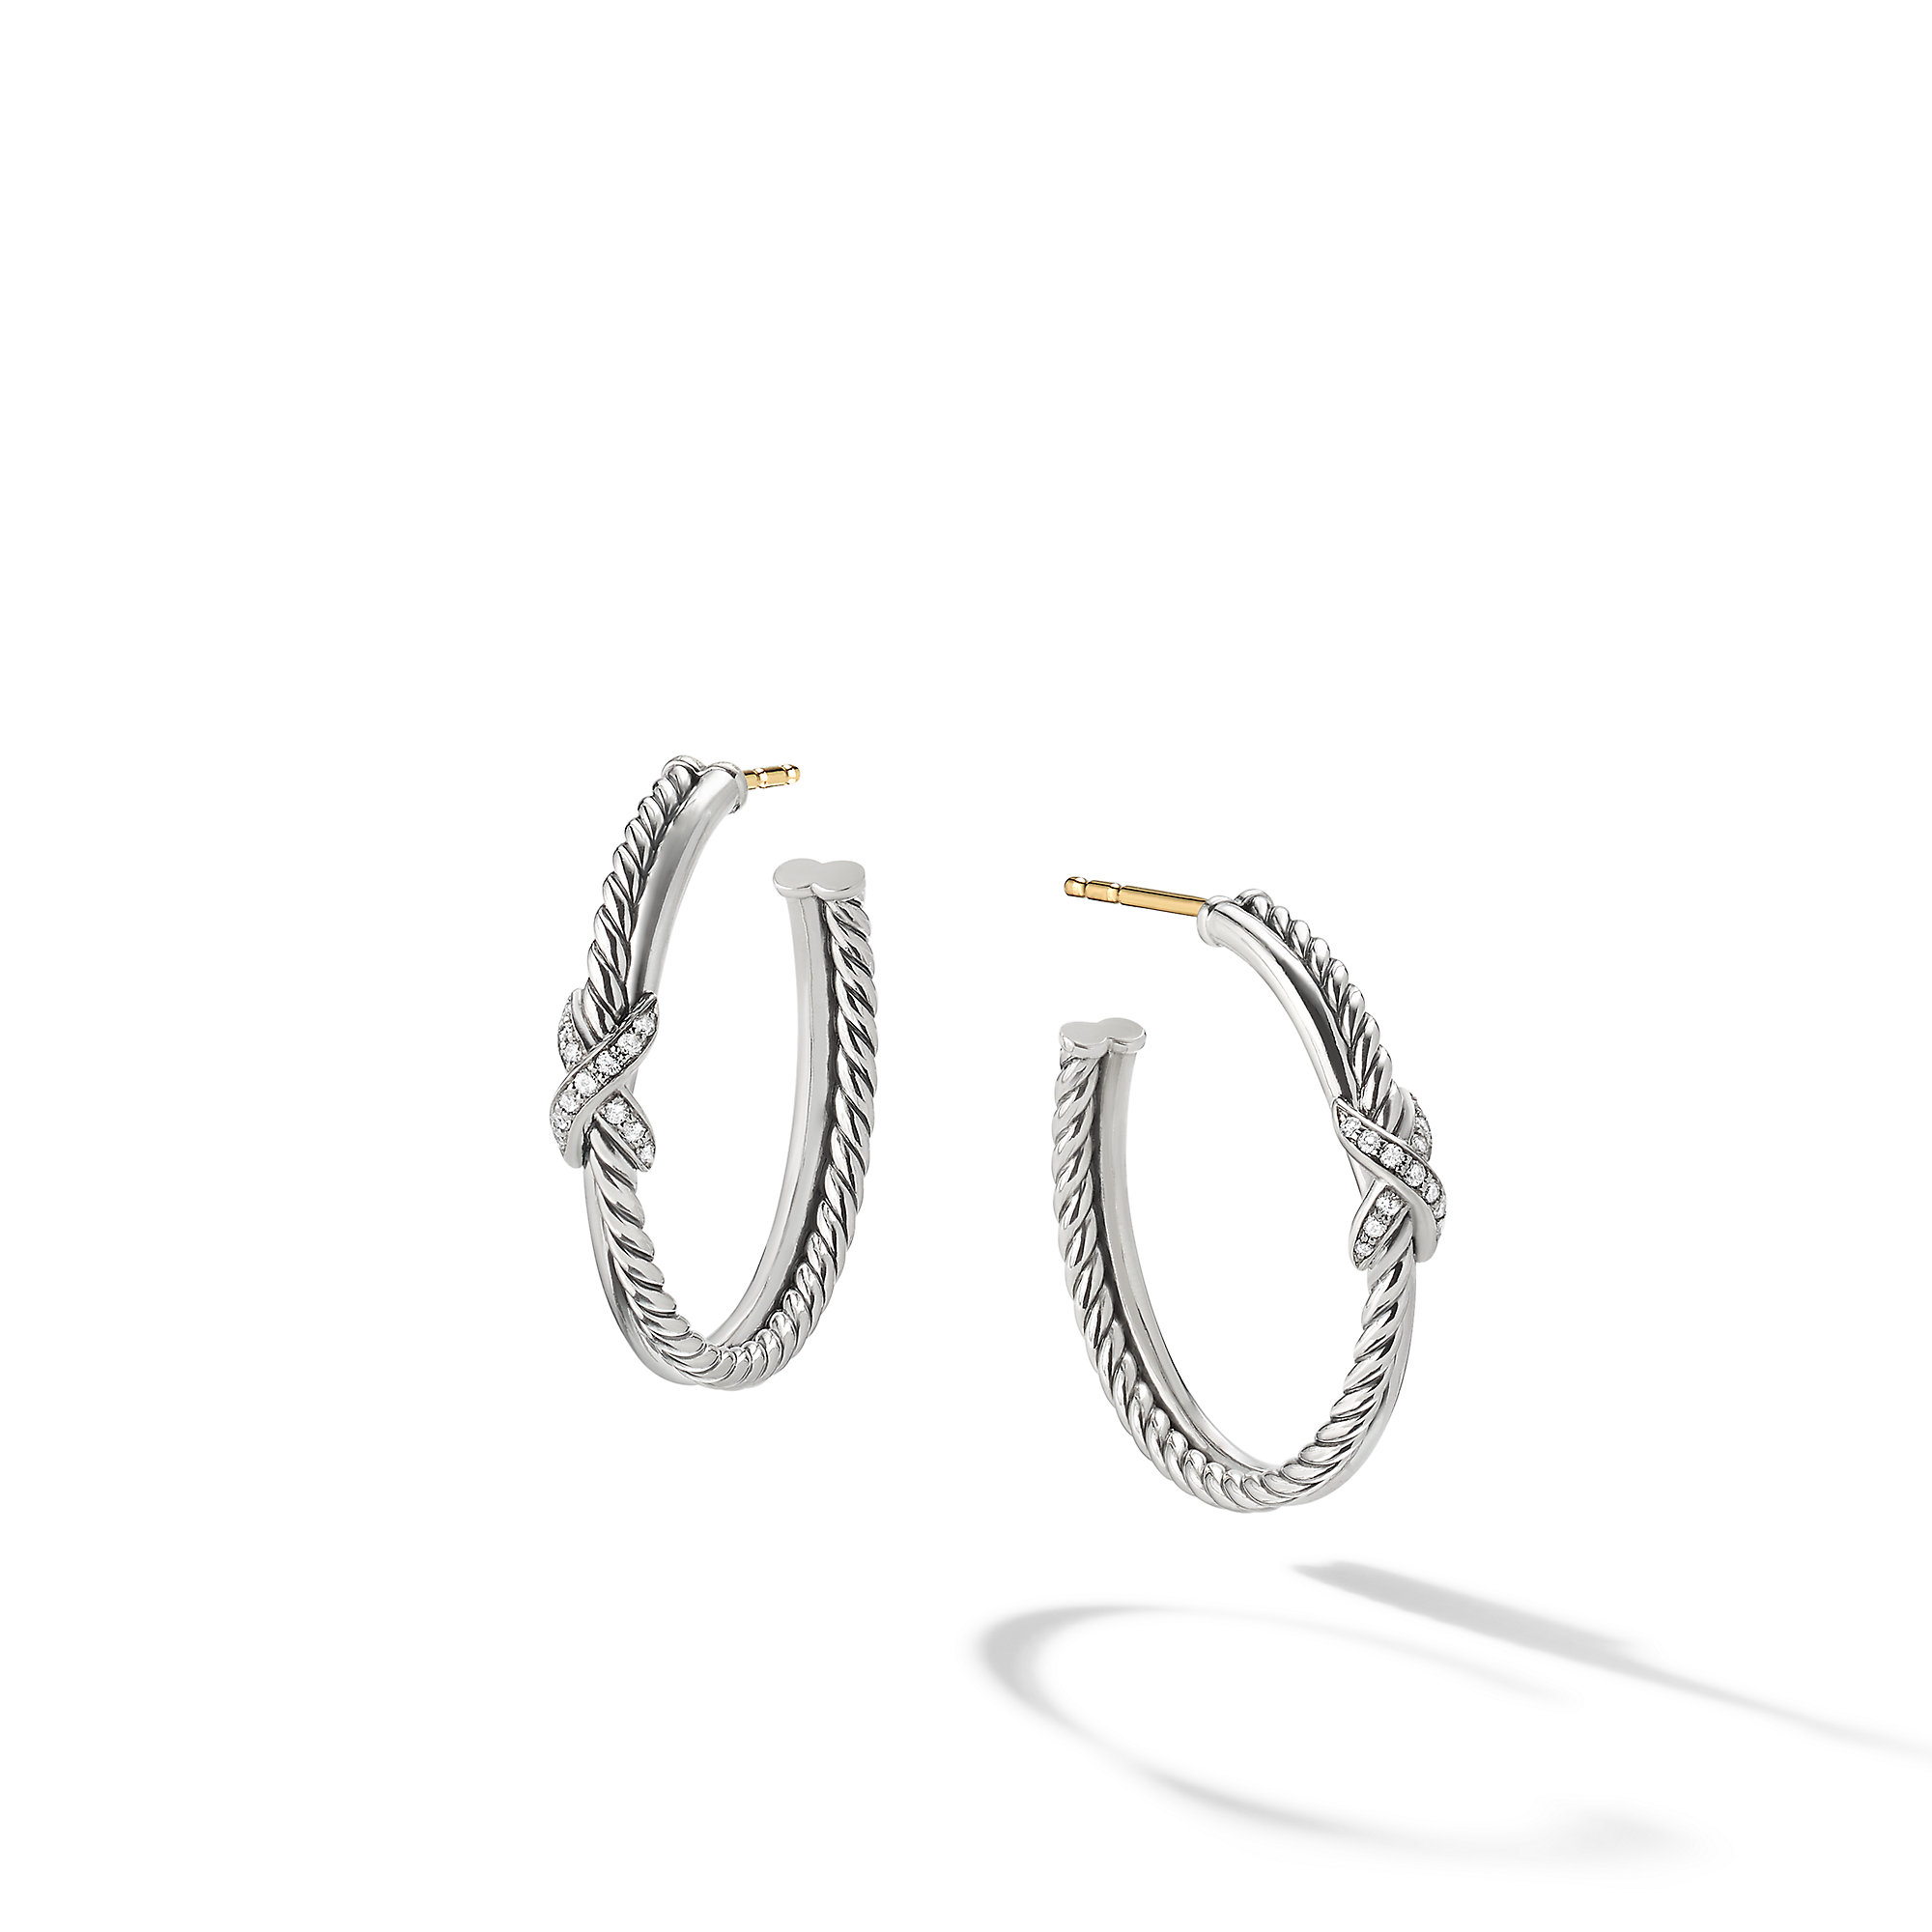 Petite X Hoop Earrings in Sterling Silver with Pave Diamonds